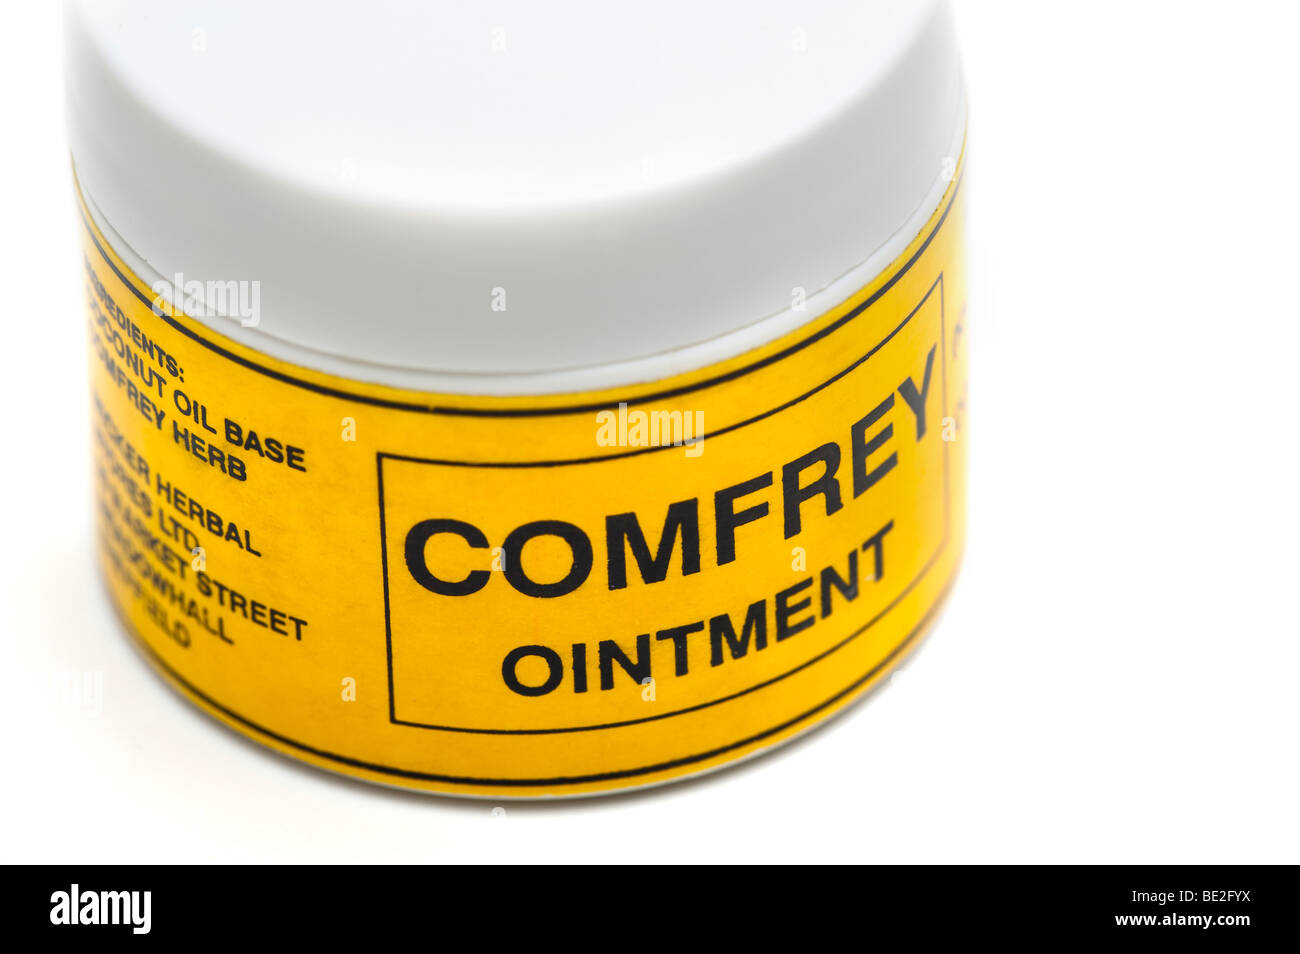 white plastic tub of Comfrey ointment Stock Photo